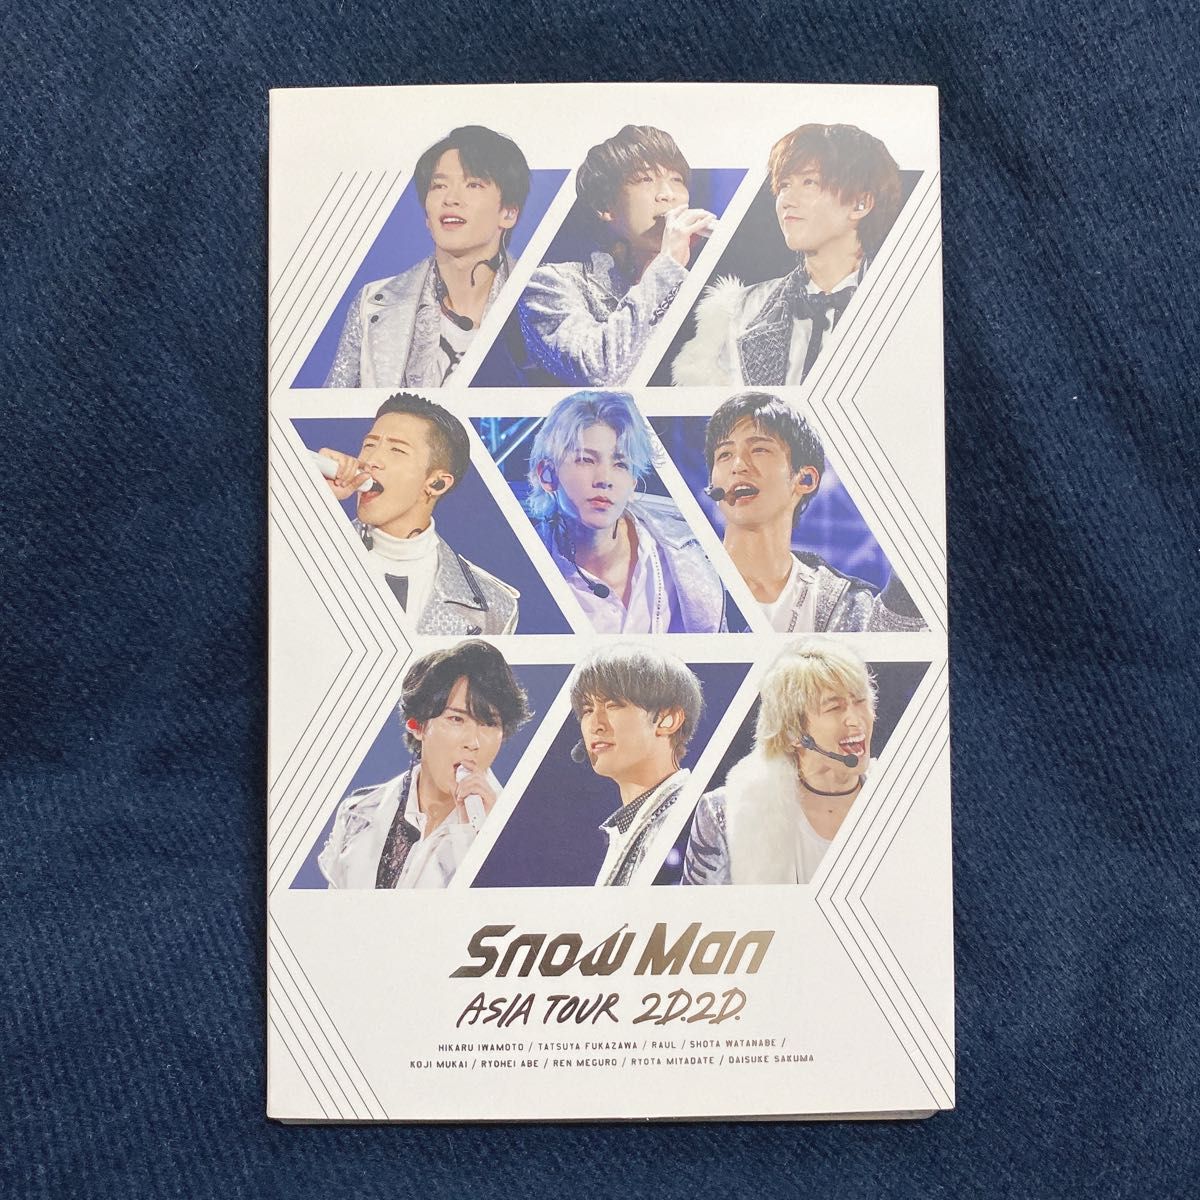 SnowMan ライブDVD Blu-ray ASIA TOUR 2D2D 初回盤&通常盤セット 